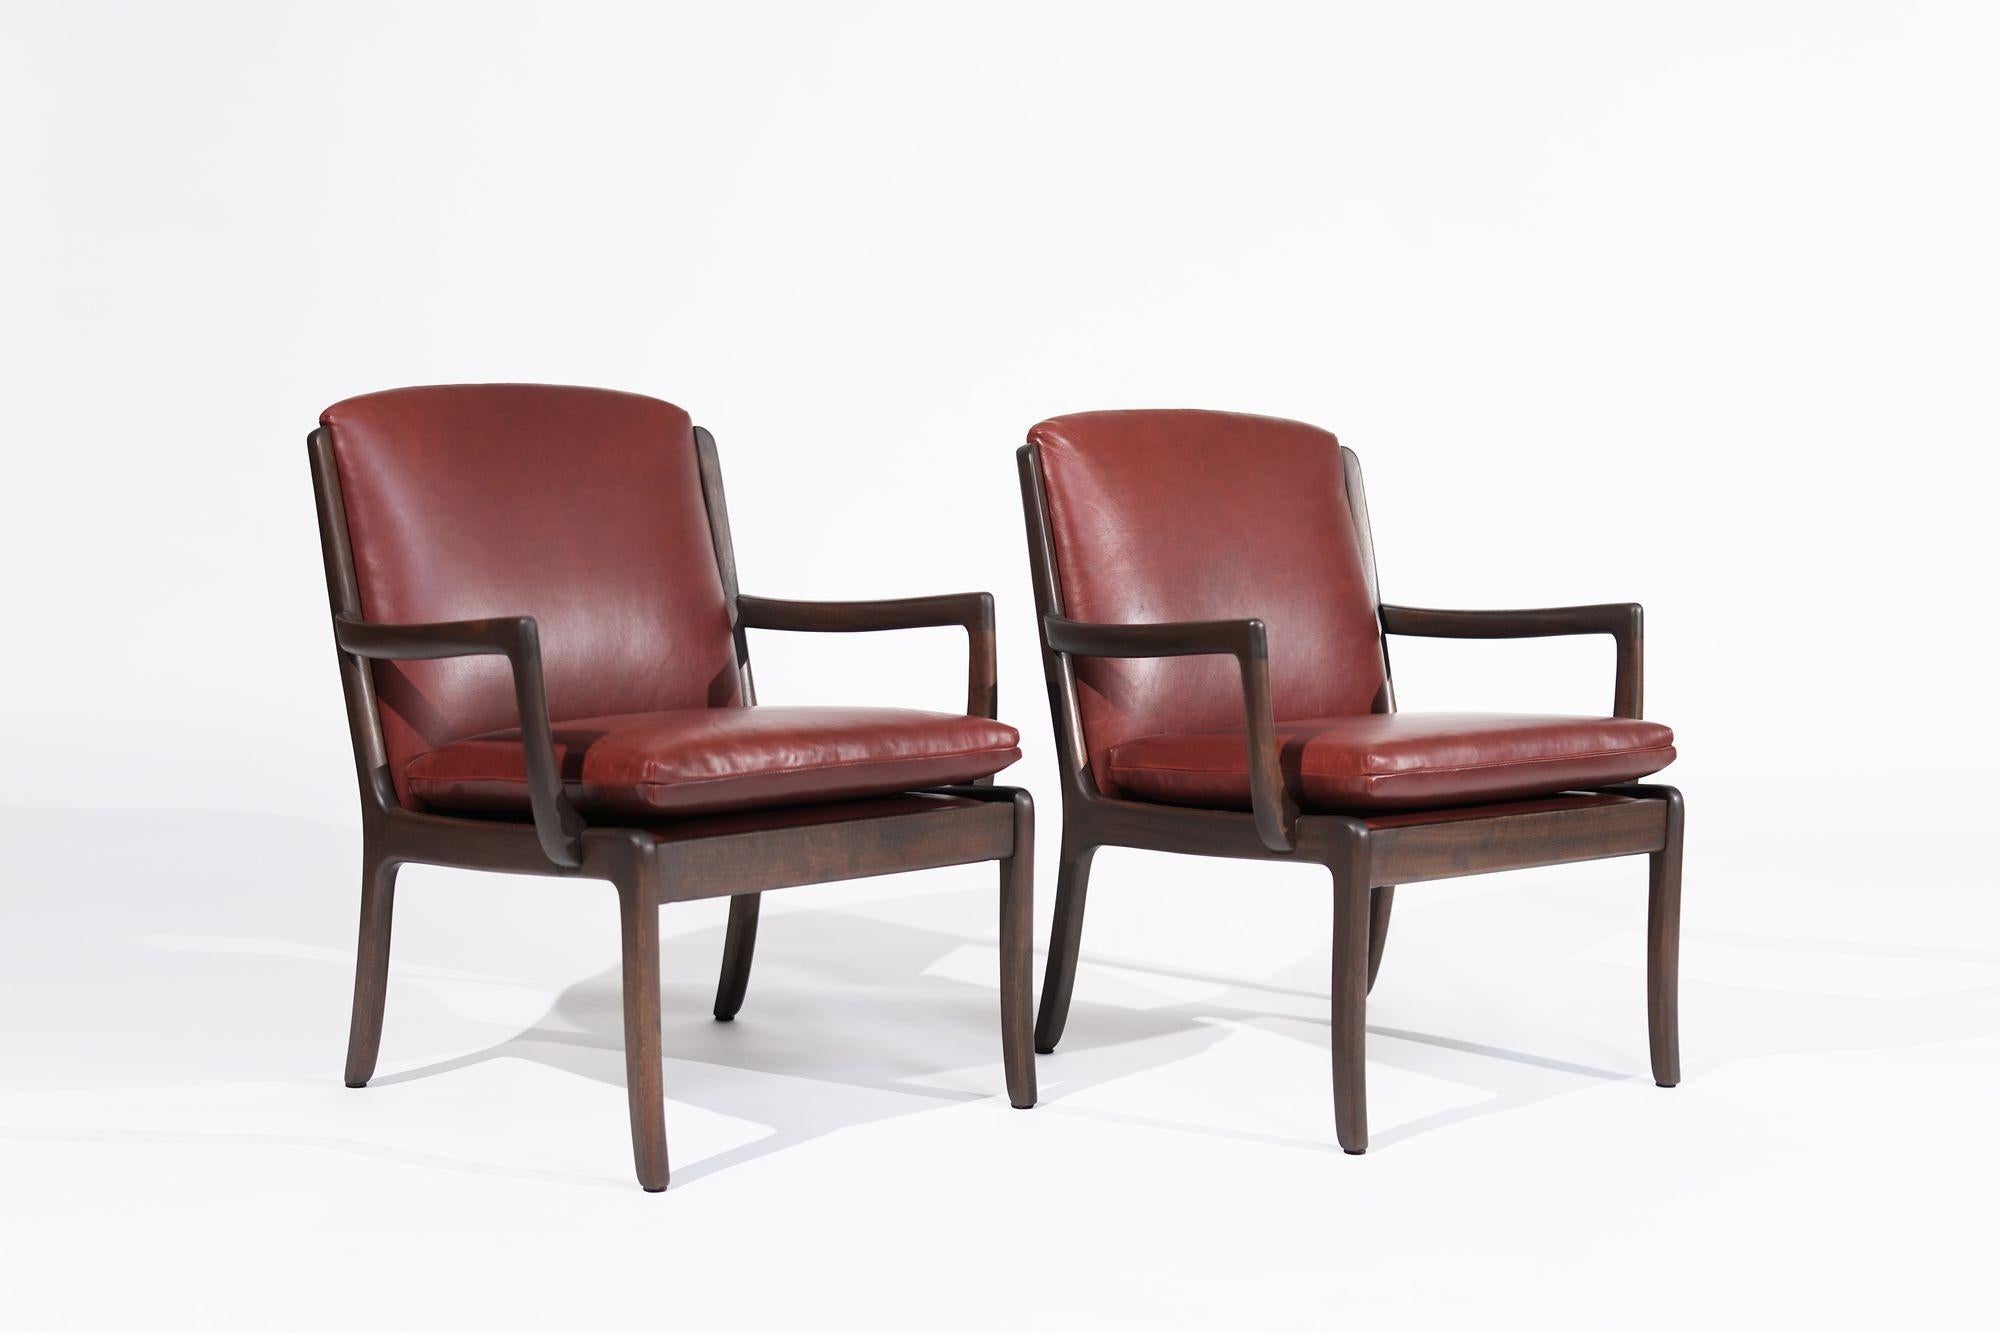 An exquisite set of Scandinavian Modern lounge chairs by renowned Danish designer Ole Wanscher for Cado. Crafted from rich mahogany, these chairs exude sophistication and elegance. Painstakingly restored to their original glory and reupholstered in